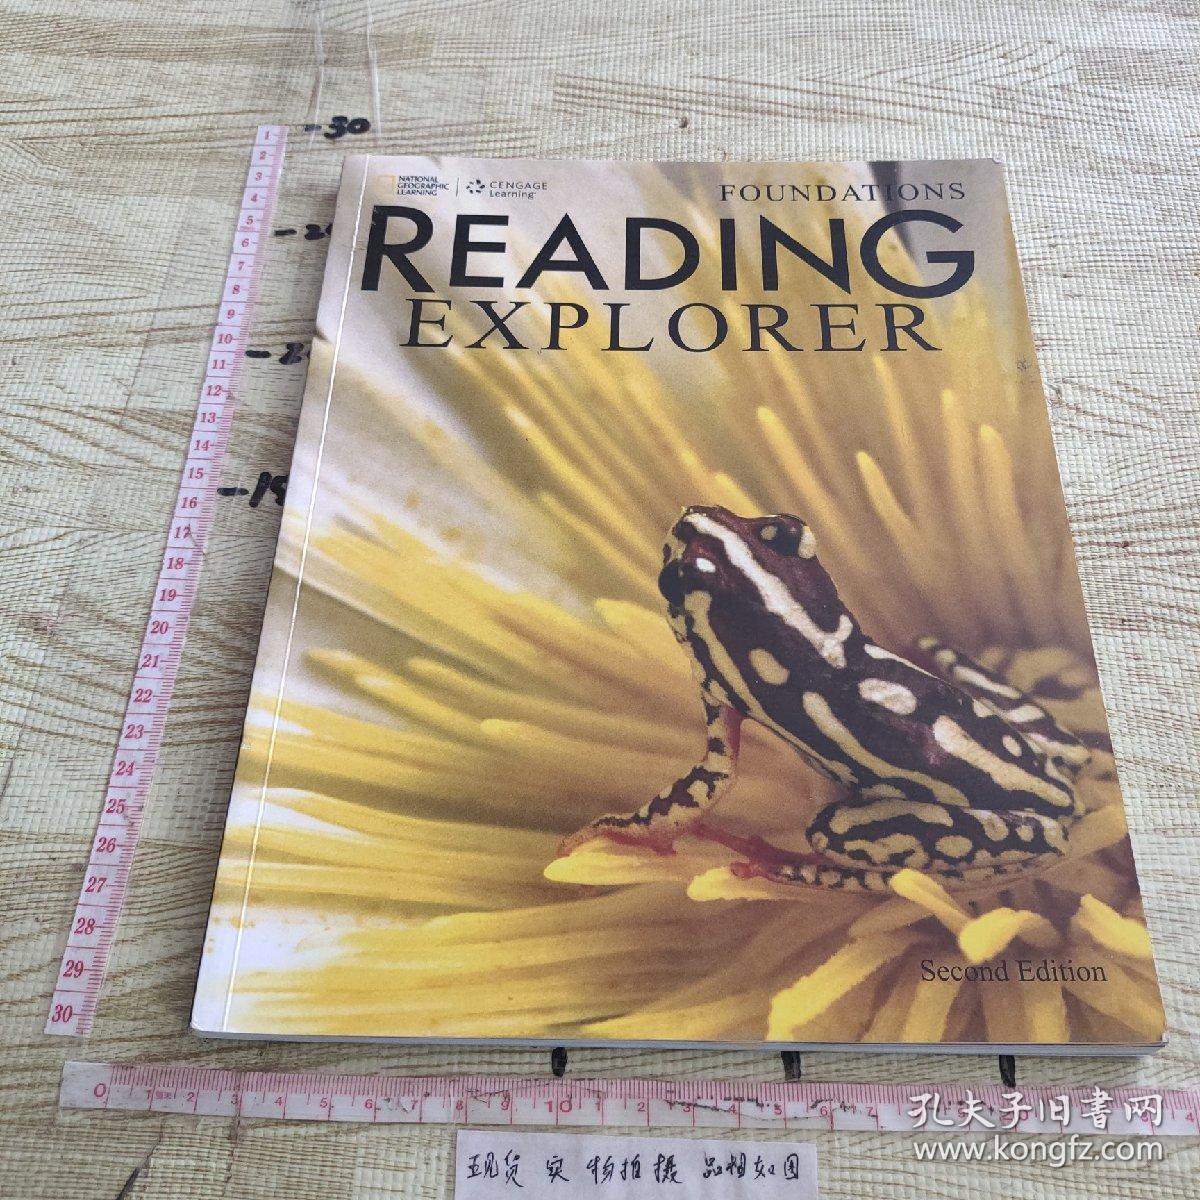 Reading Explorer Foundations: Student Book with Online Workbook (Reading Explorer, Second Edition) 平装